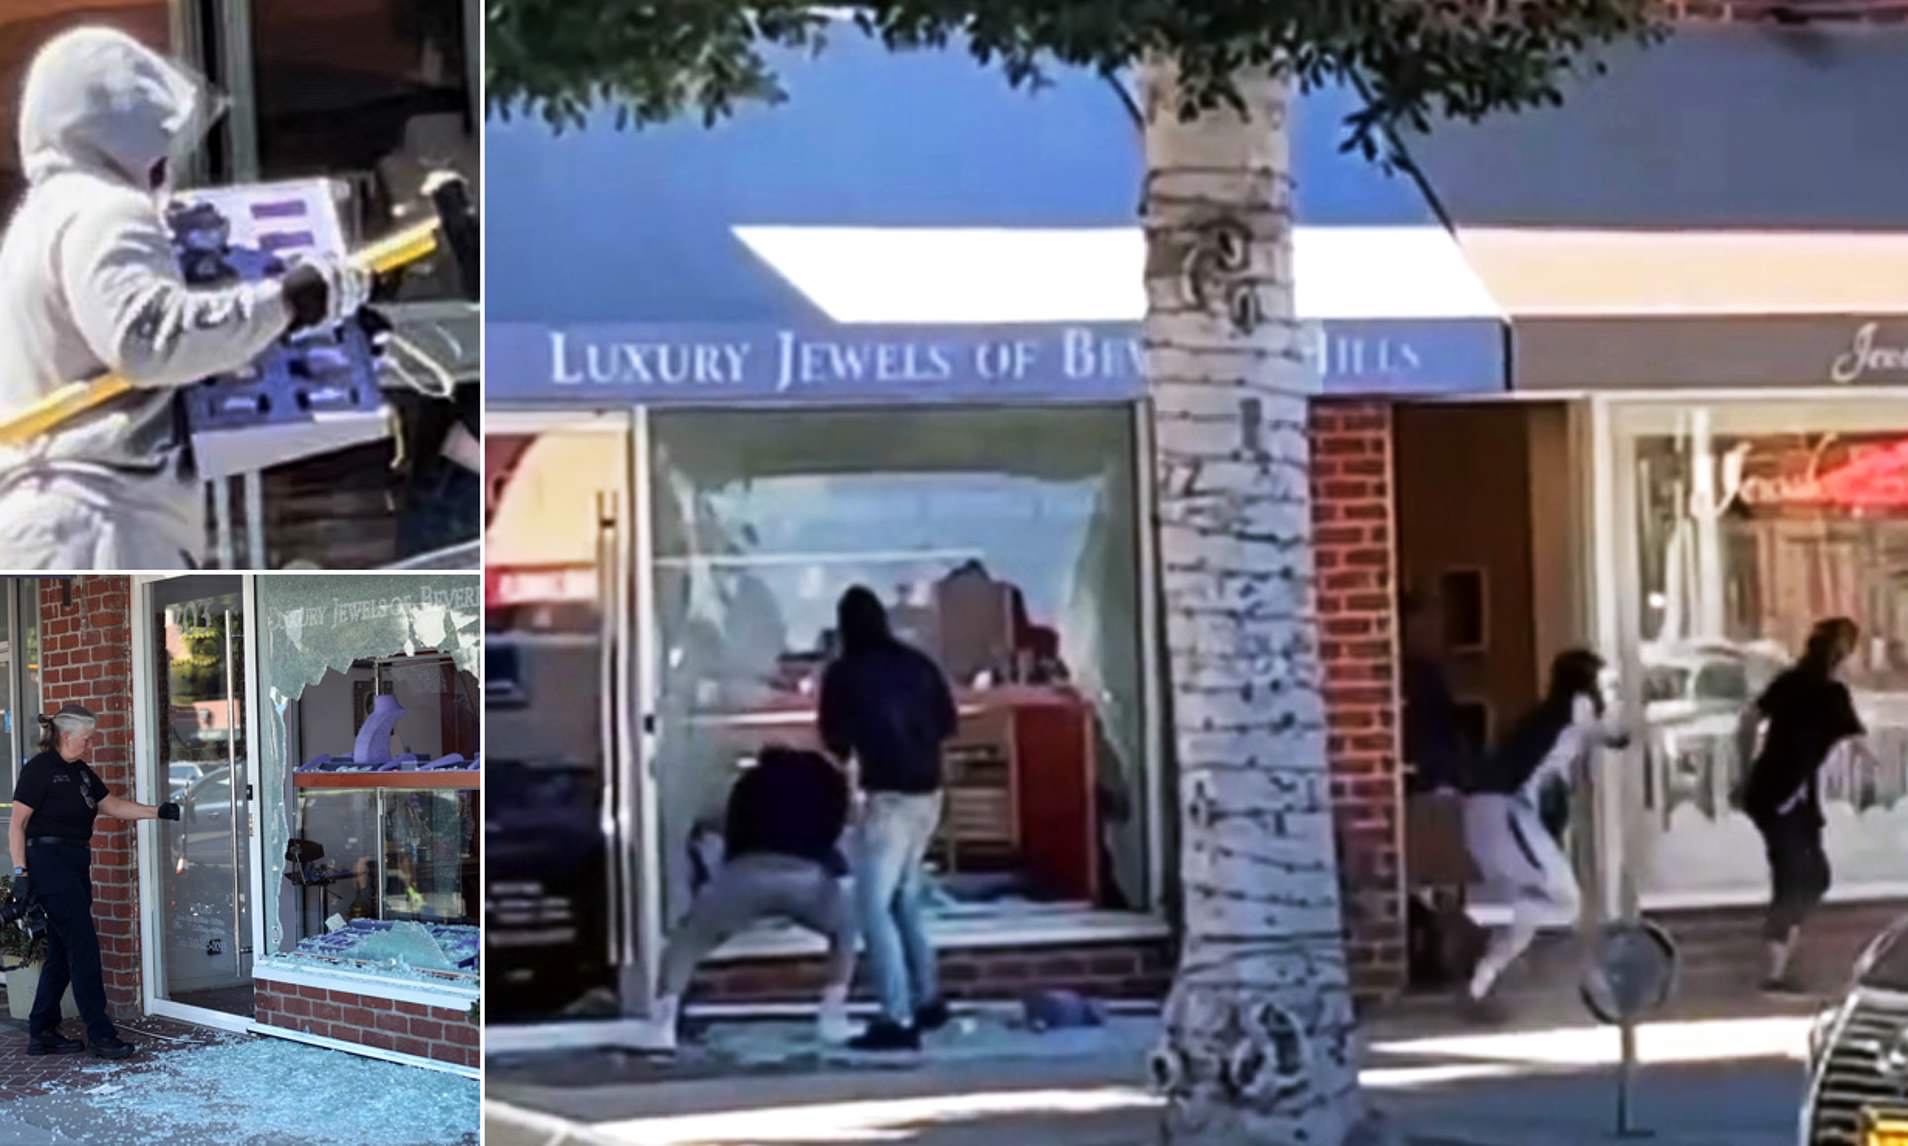 Five Robbers Caught on Video Breaking Into Jewelry Store With Sledgehammers and Stealing Up to $5M Worth of Items (Video)